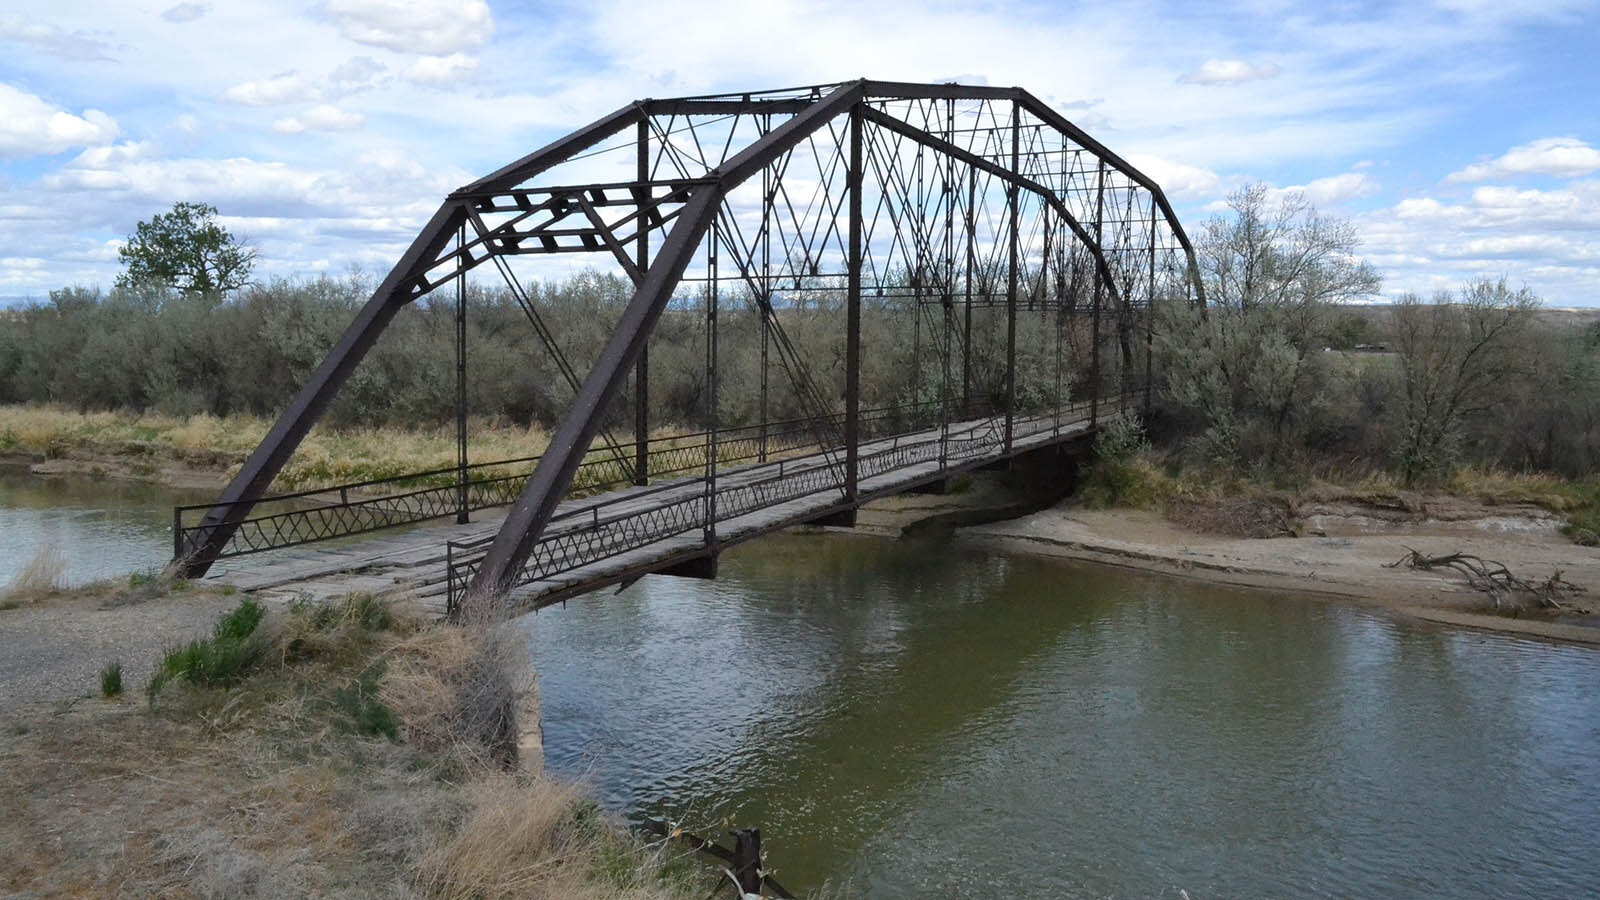 The Rairden Bridge over the Big Horn River in Manderson, Wyoming. It was built in 1916 originally, then later replaced and finally abandoned in 1979.